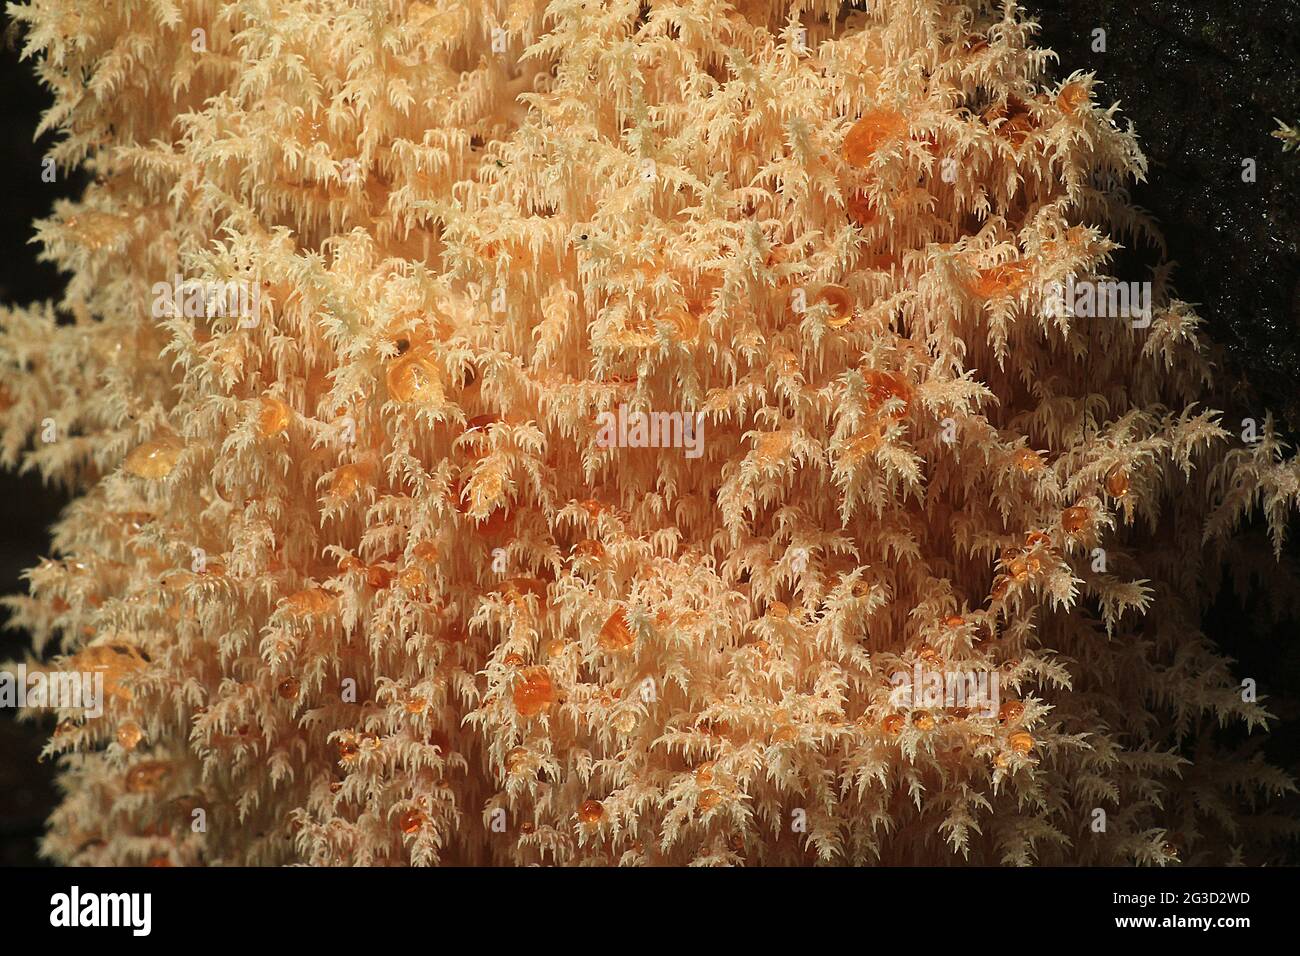 Coral tooth fungus (Hericium coralloides) Stock Photo